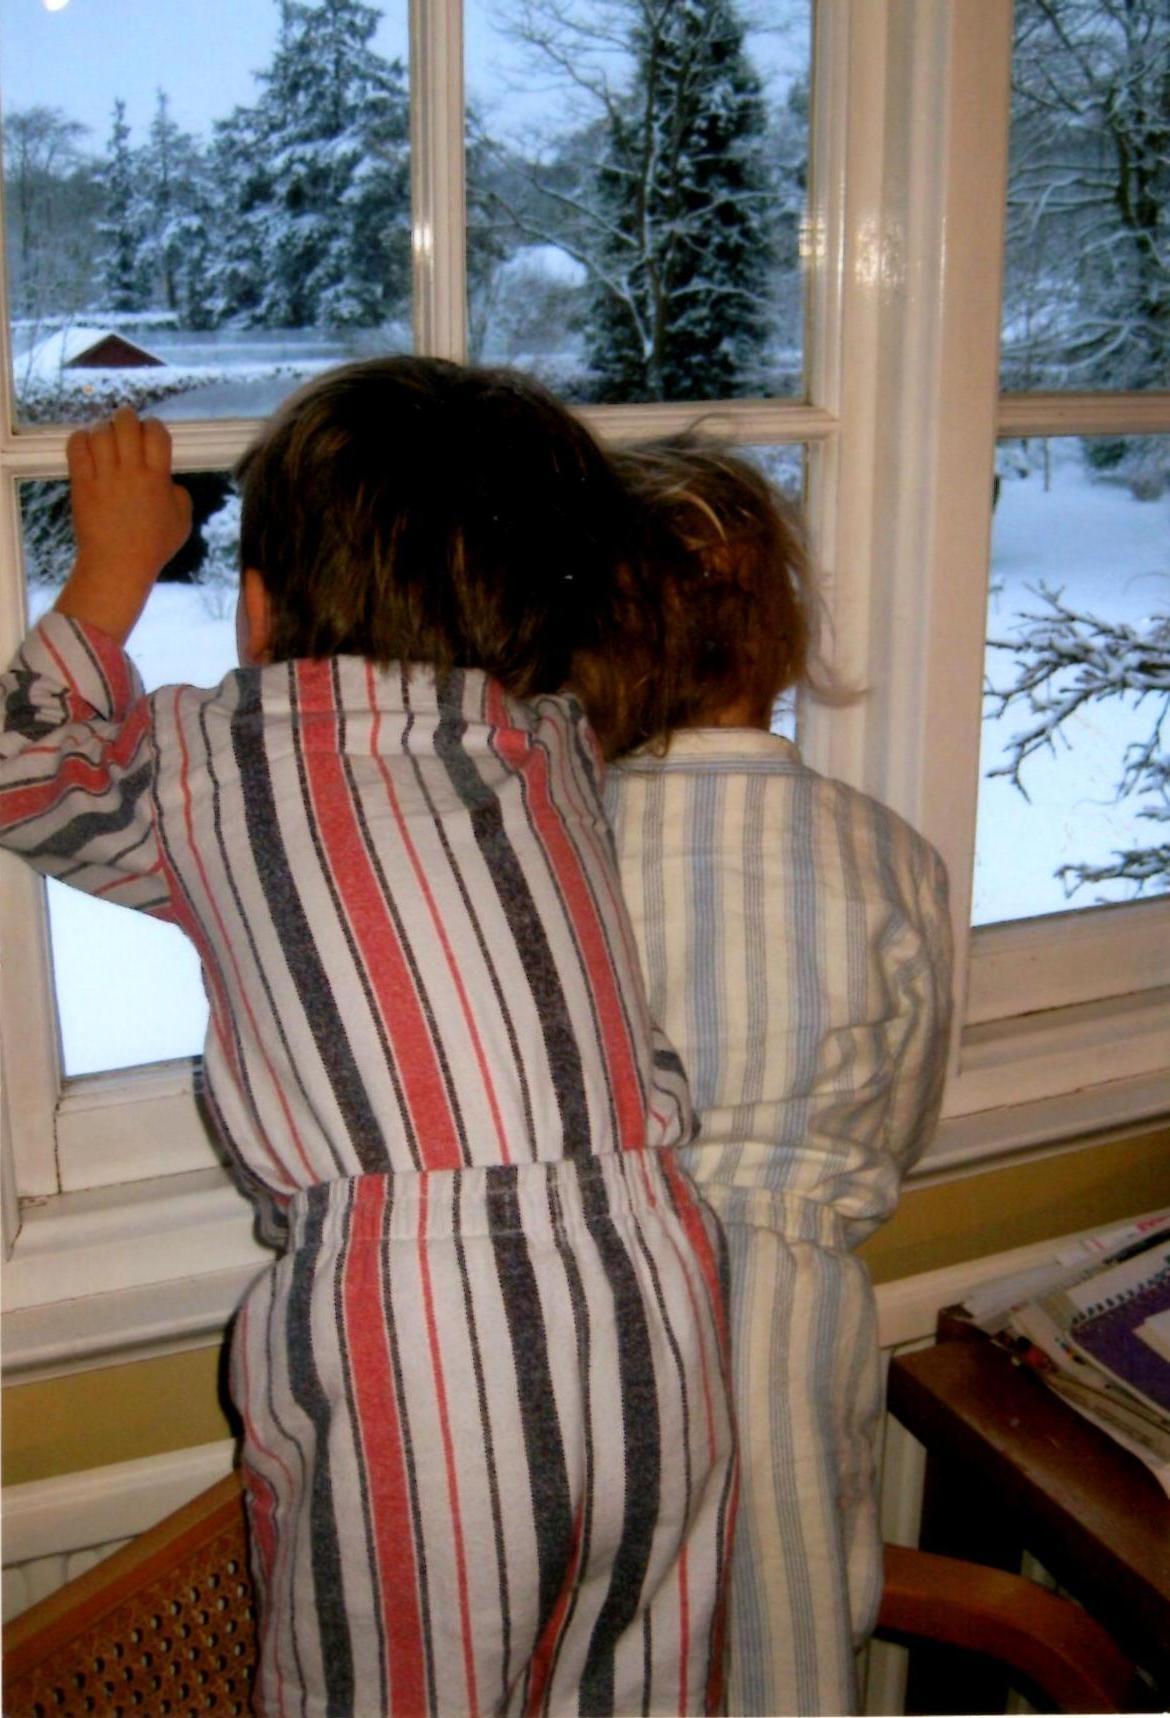 How to beat the snowy weather.. tips from The Pyjama House